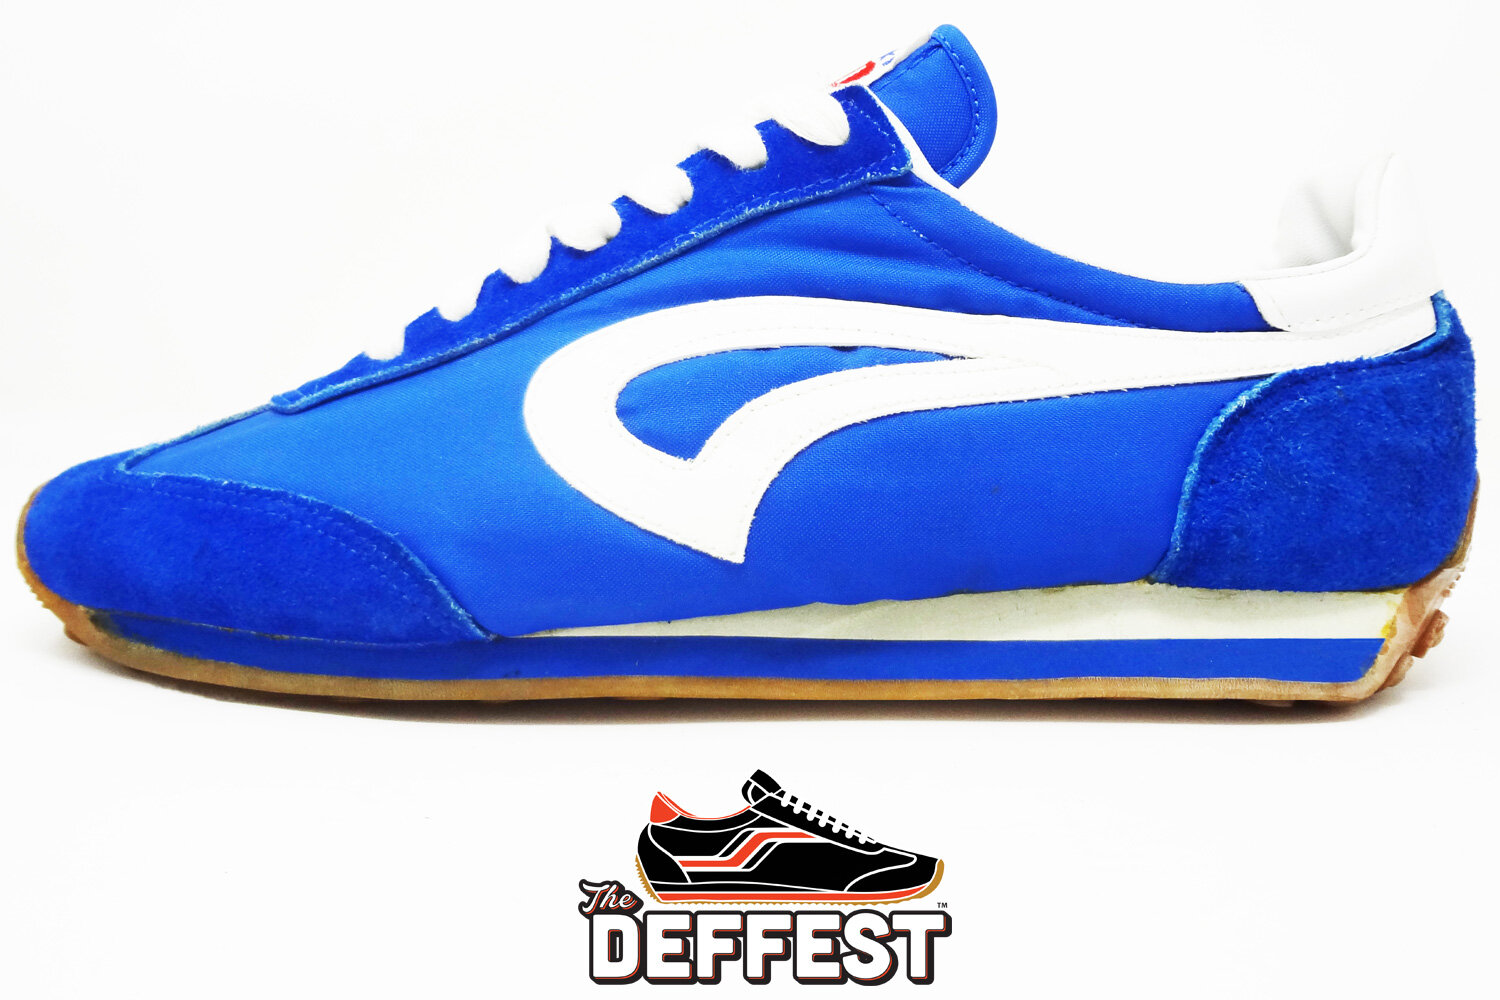 MVP brand 1970s rare vintage sneakers @ The Deffest